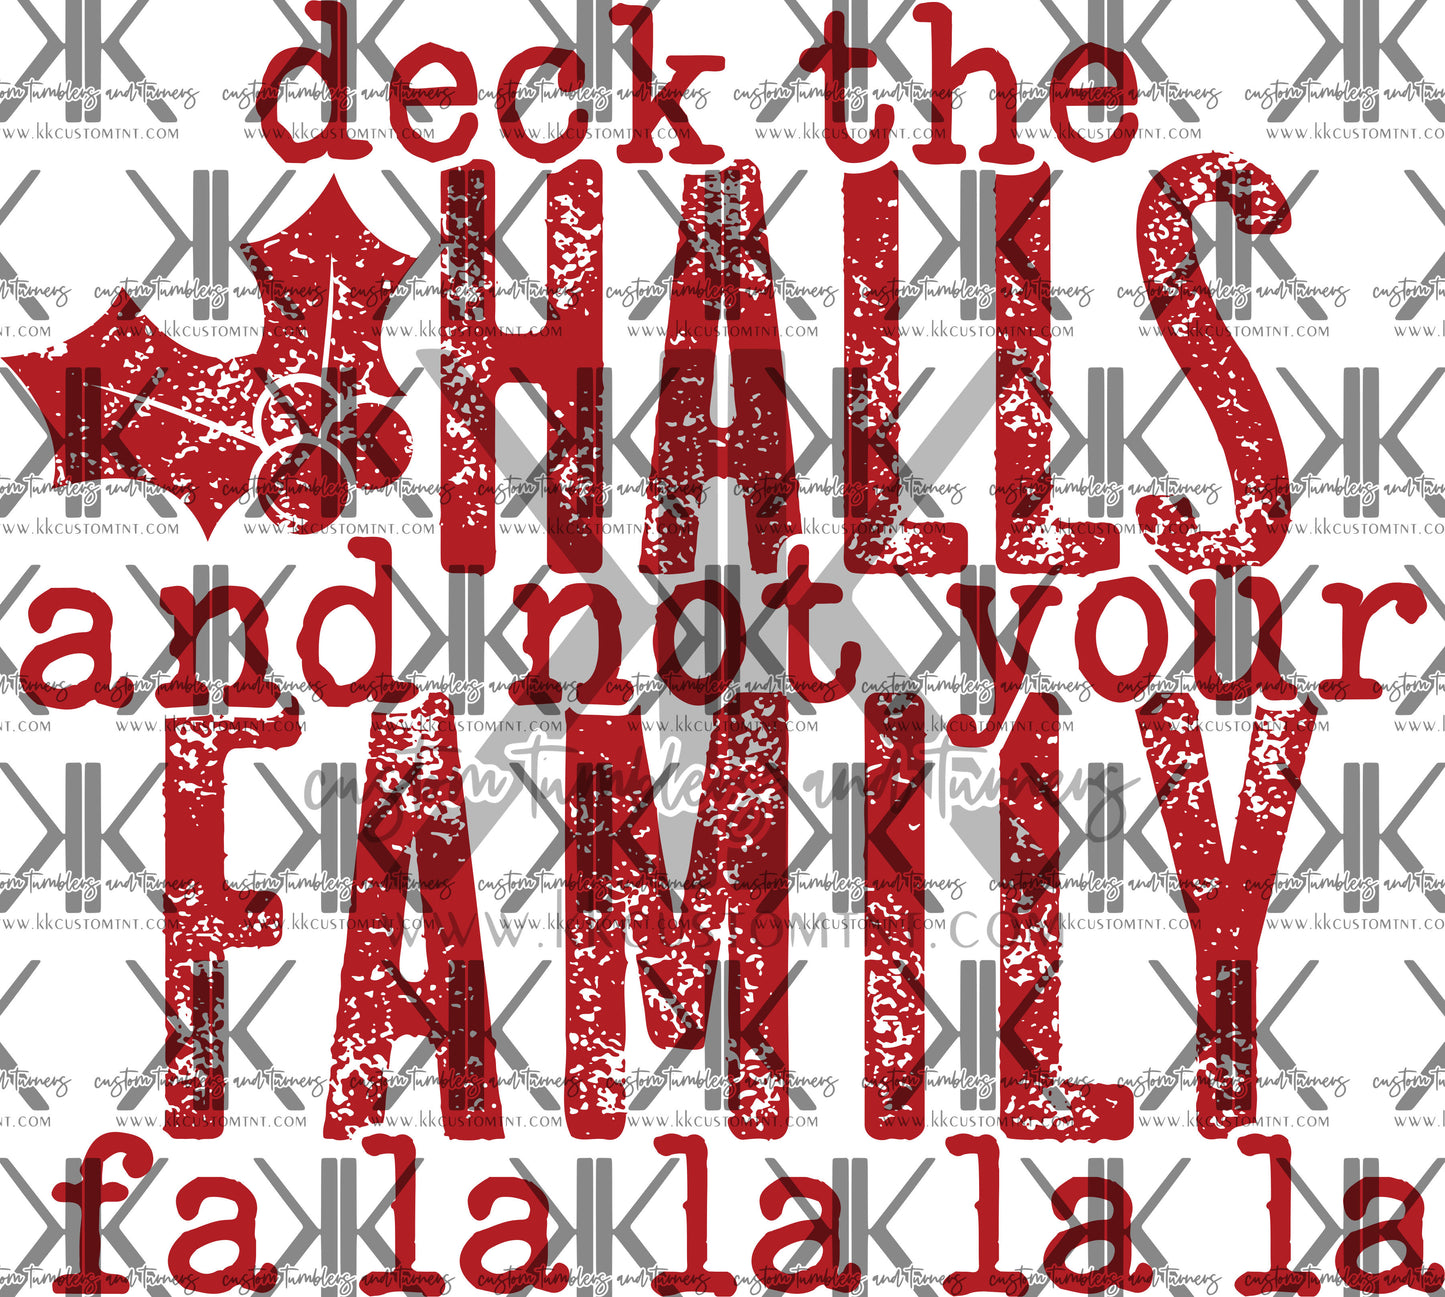 DECK THE HALLS & NOT YOUR FAMILY DTF